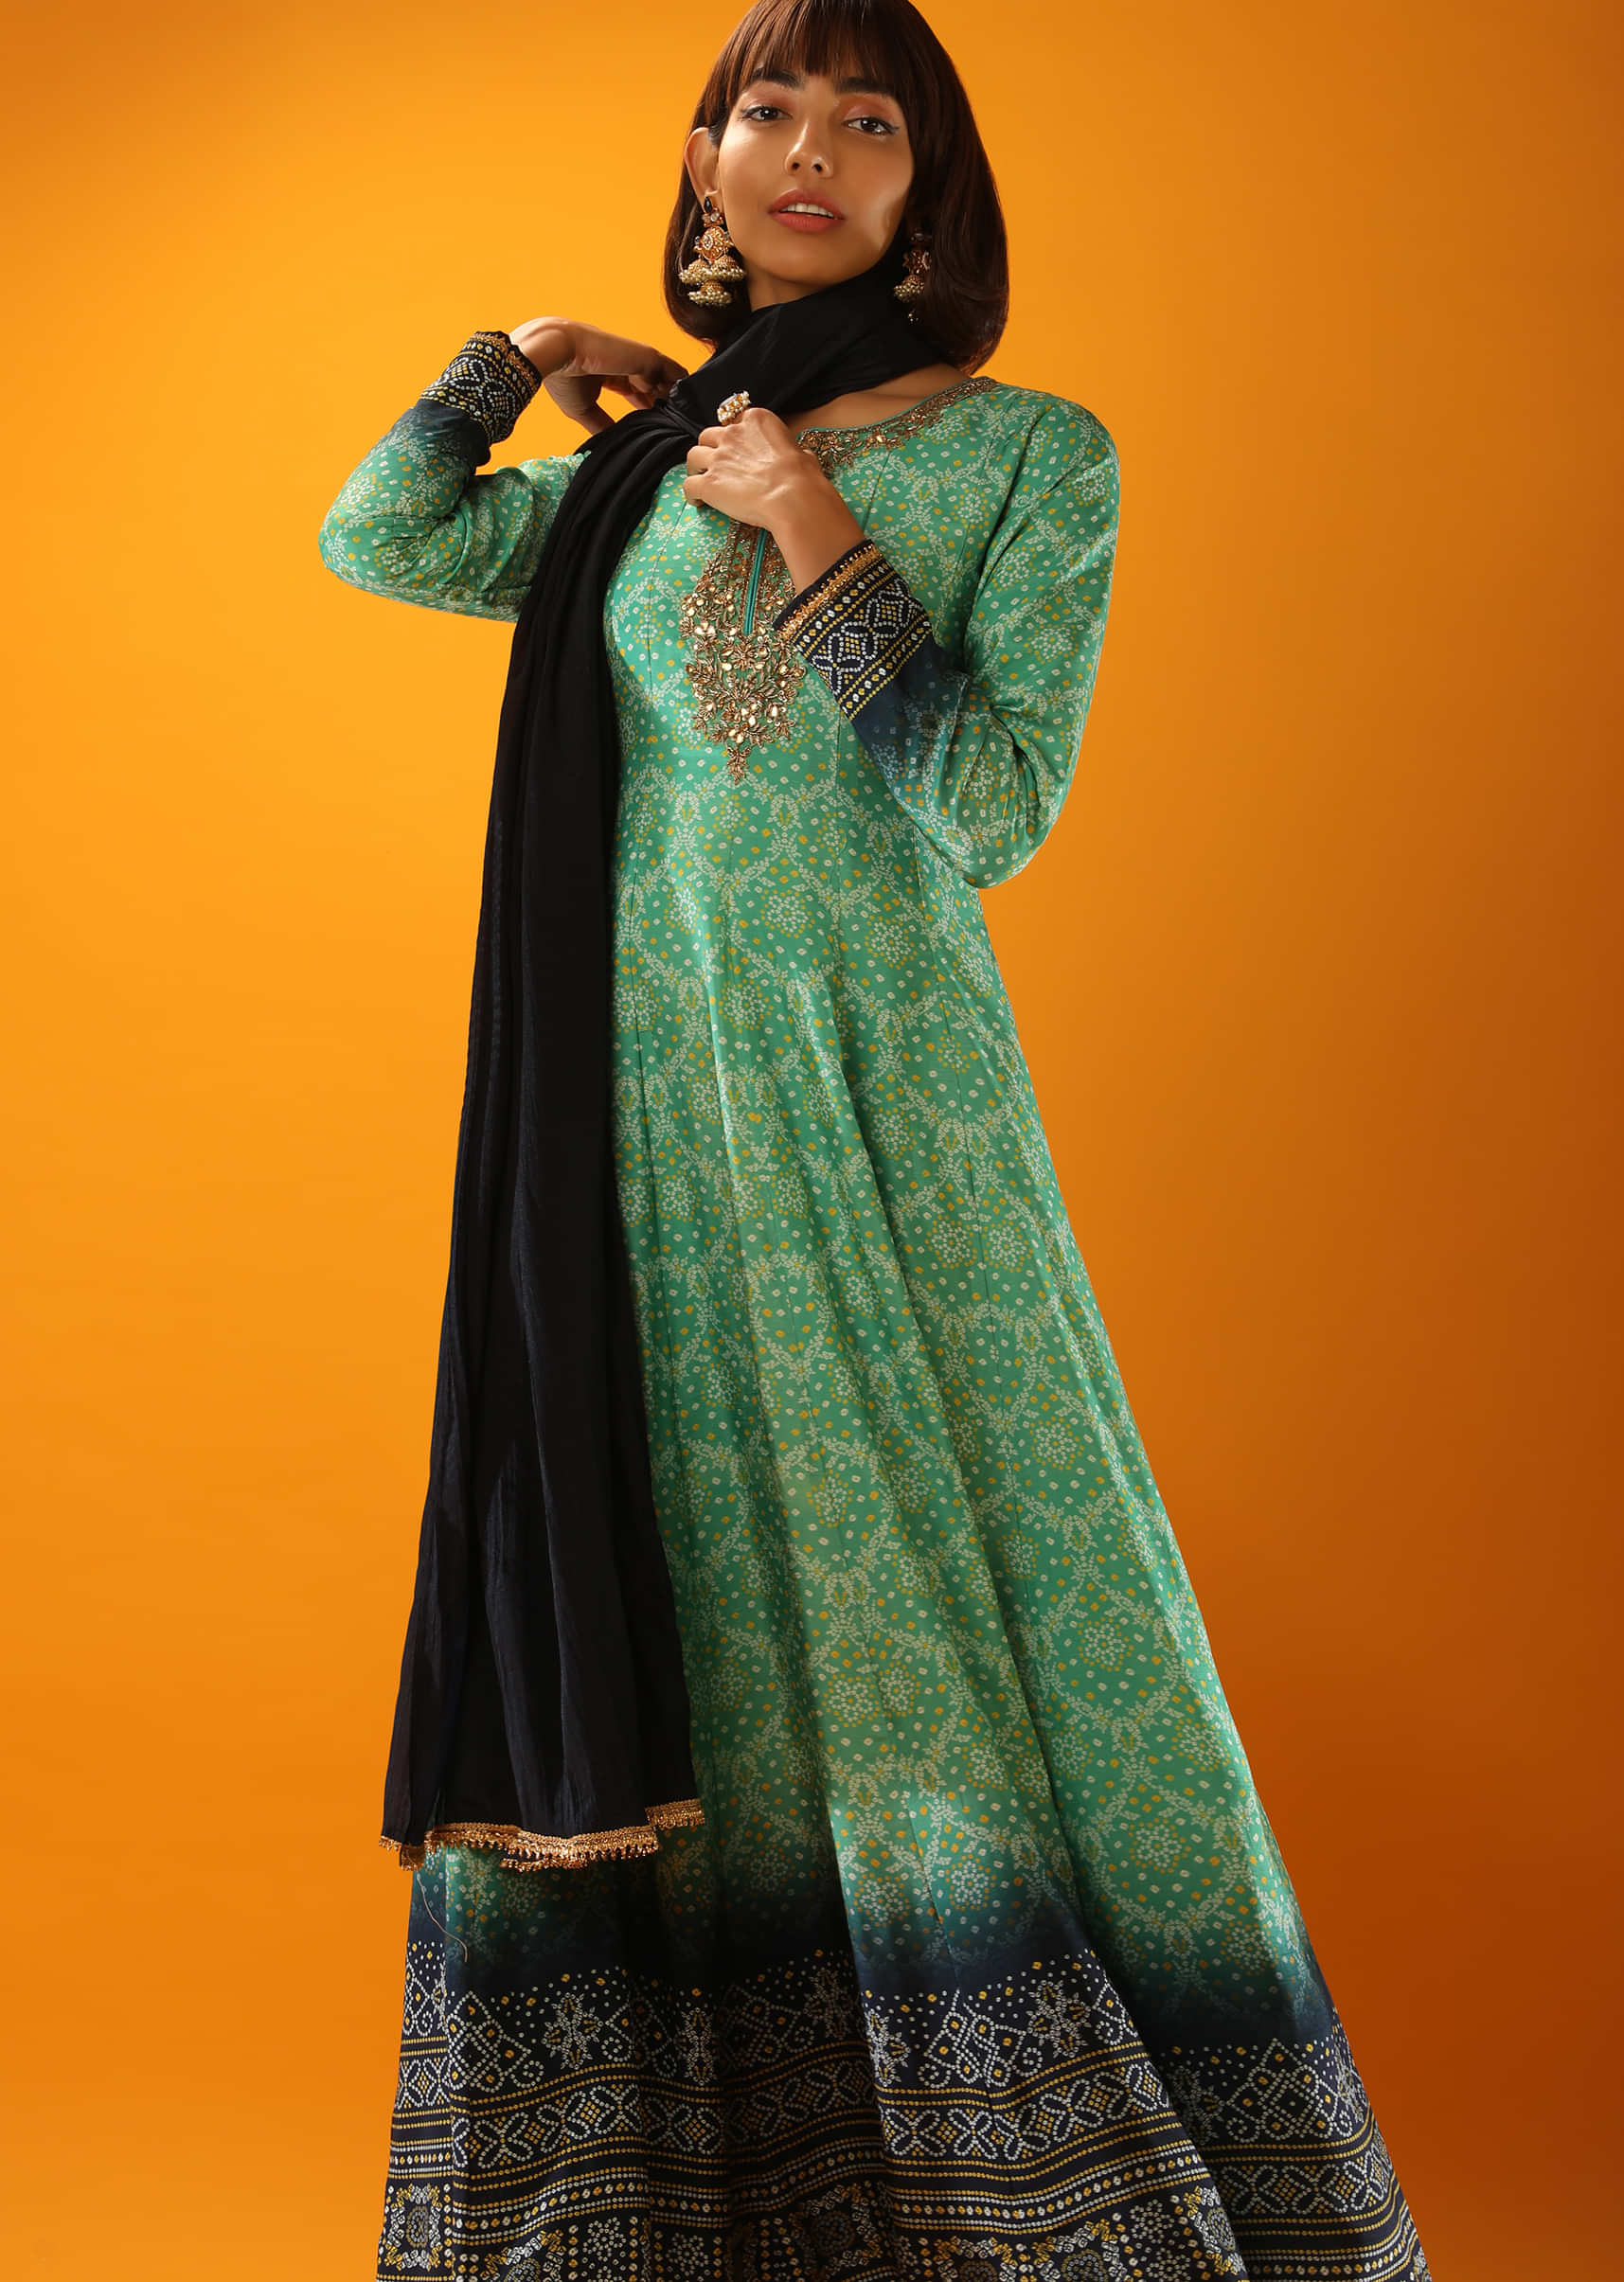 Sea Green And Midnight Blue Ombre Anarkali Suit In Cotton Silk With Bandhani Design And Gotta Patti Embroidered Placket  